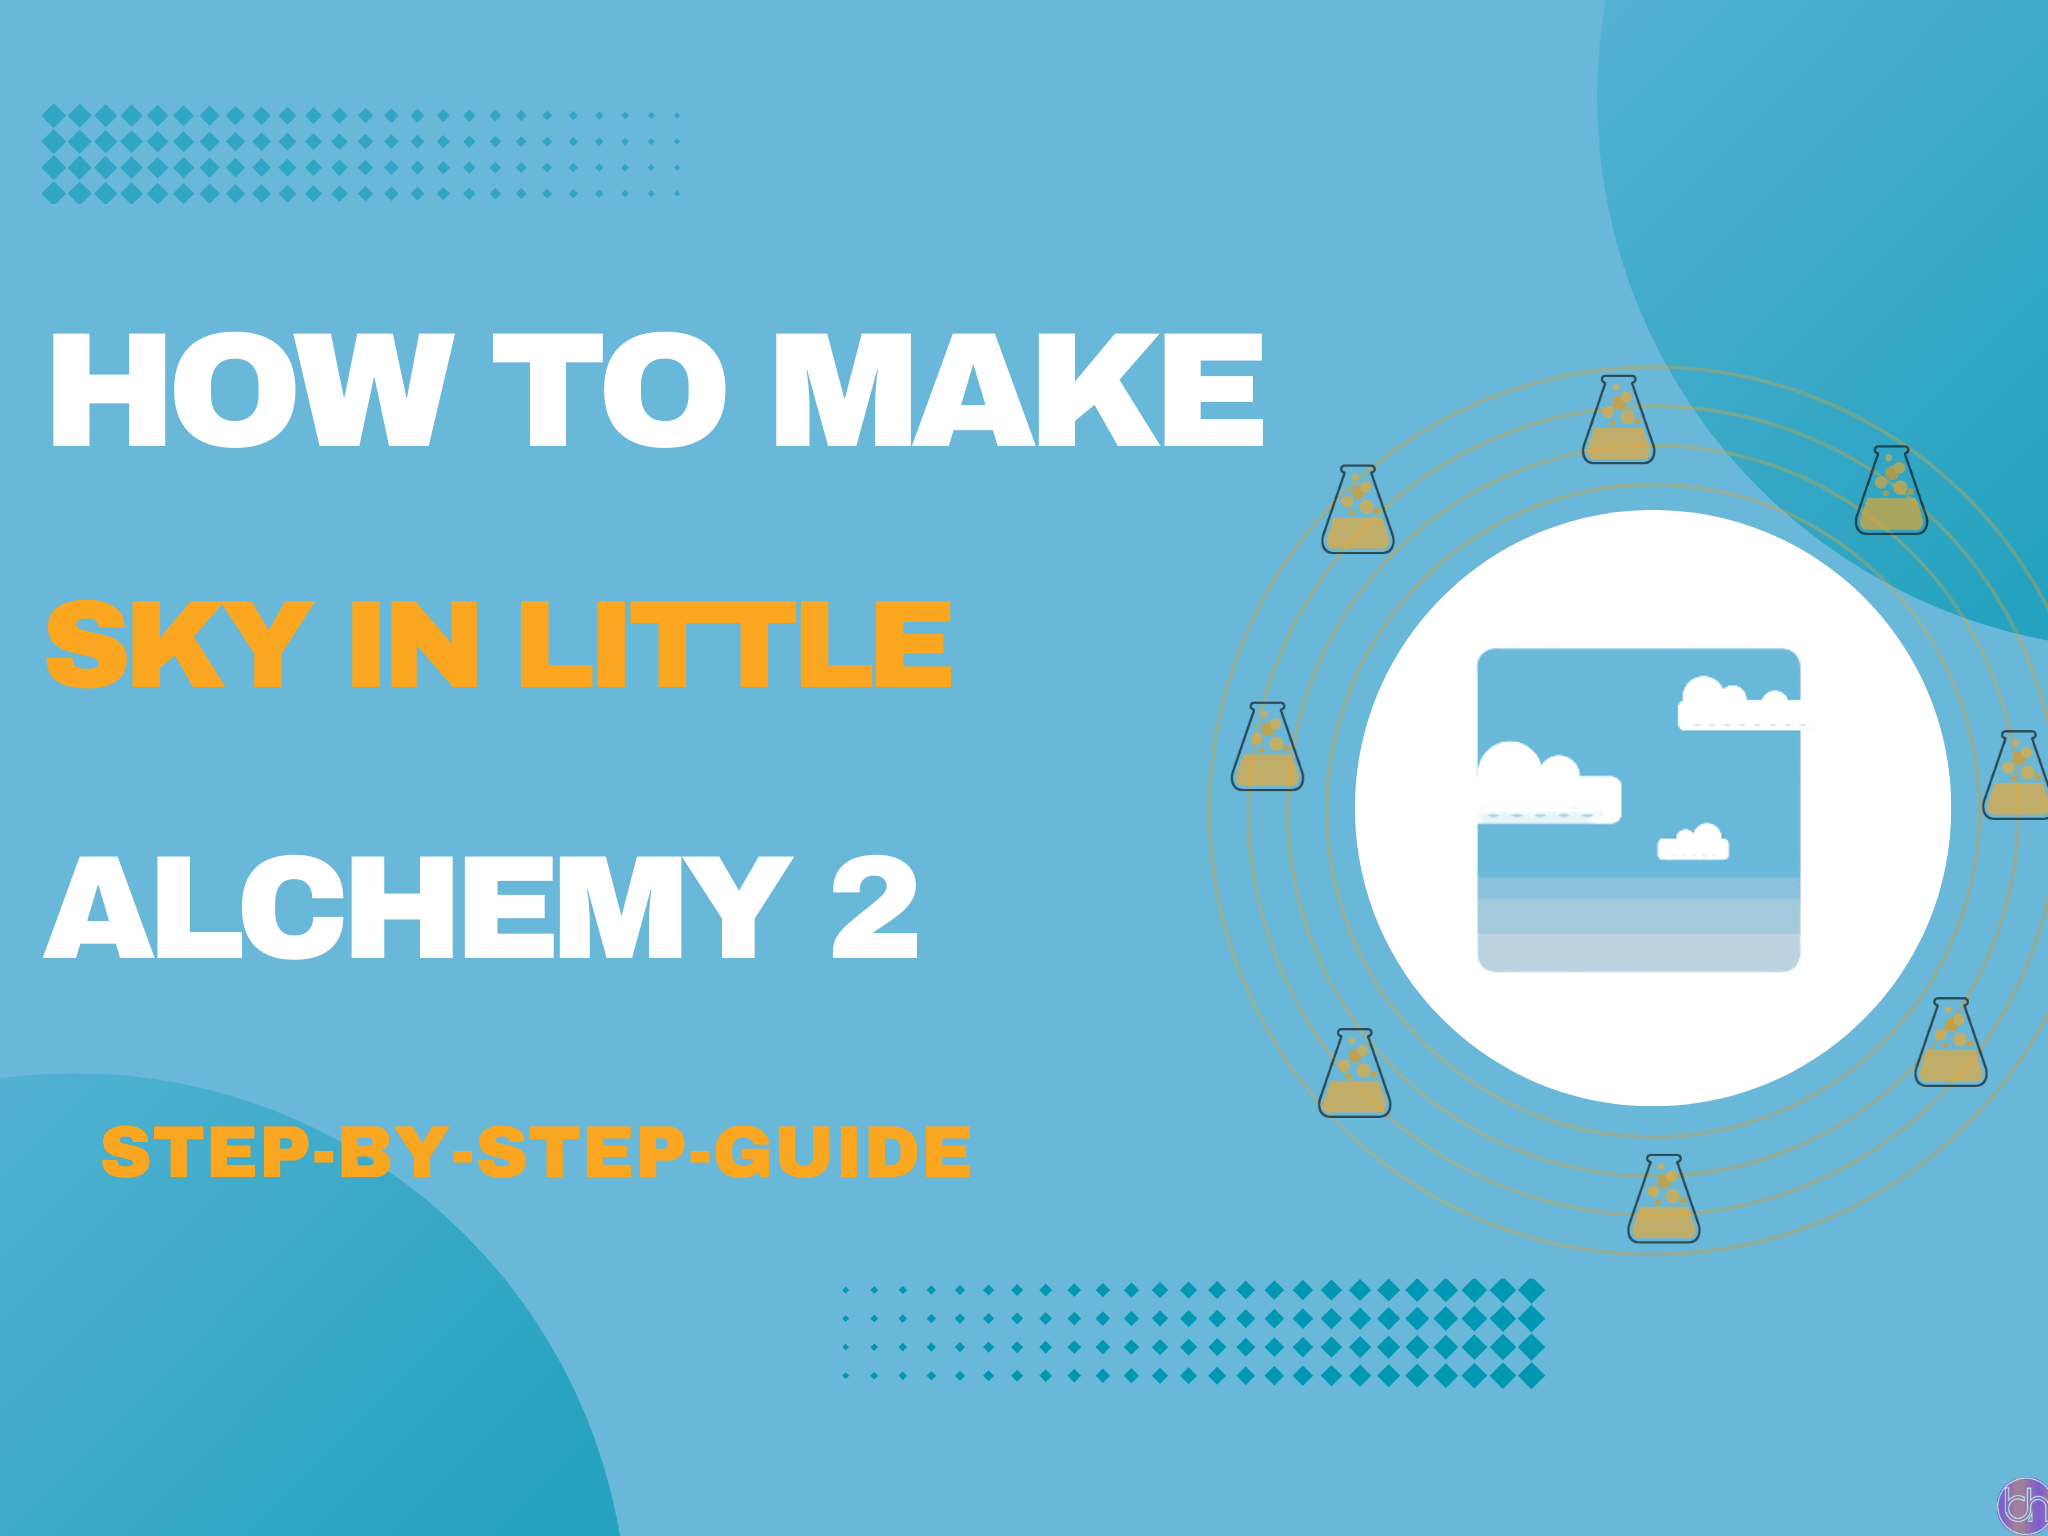 How to Make Human in little alchemy 2? (2024) - Barhow